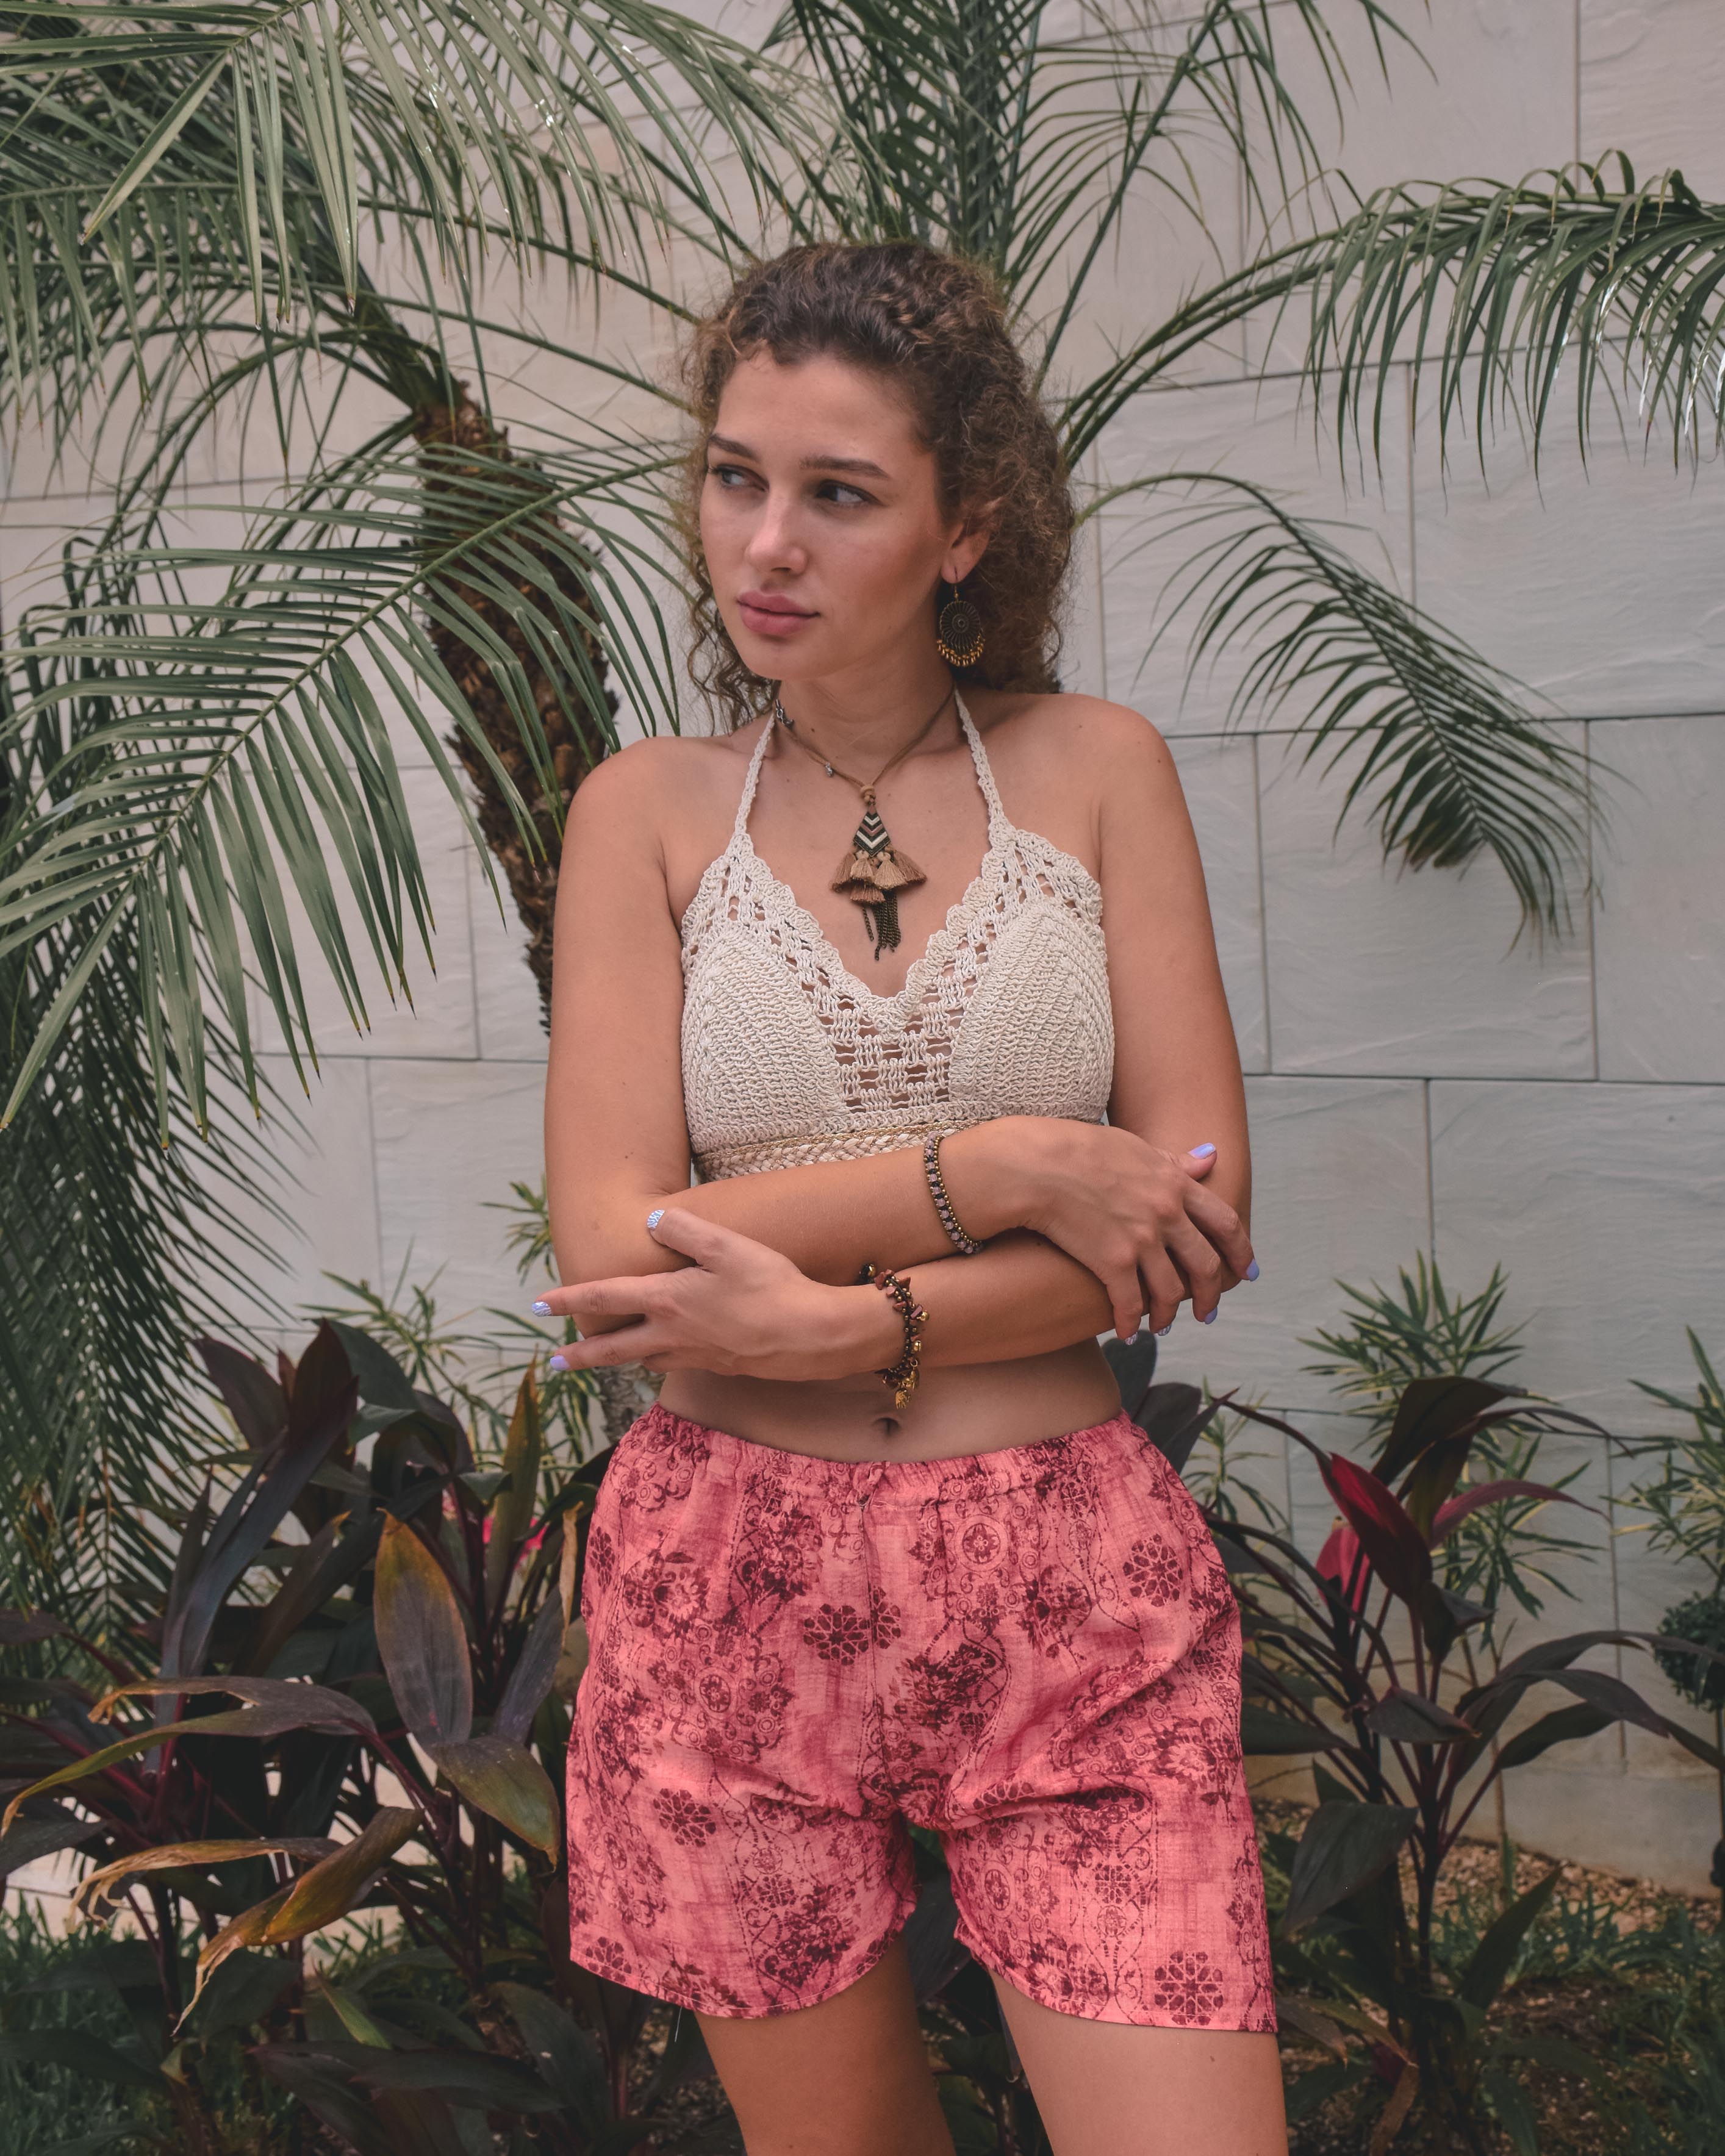 JAIPUR SHORTS Elepanta Women's Shorts - Buy Today Elephant Pants Jewelry And Bohemian Clothes Handmade In Thailand Help To Save The Elephants FairTrade And Vegan